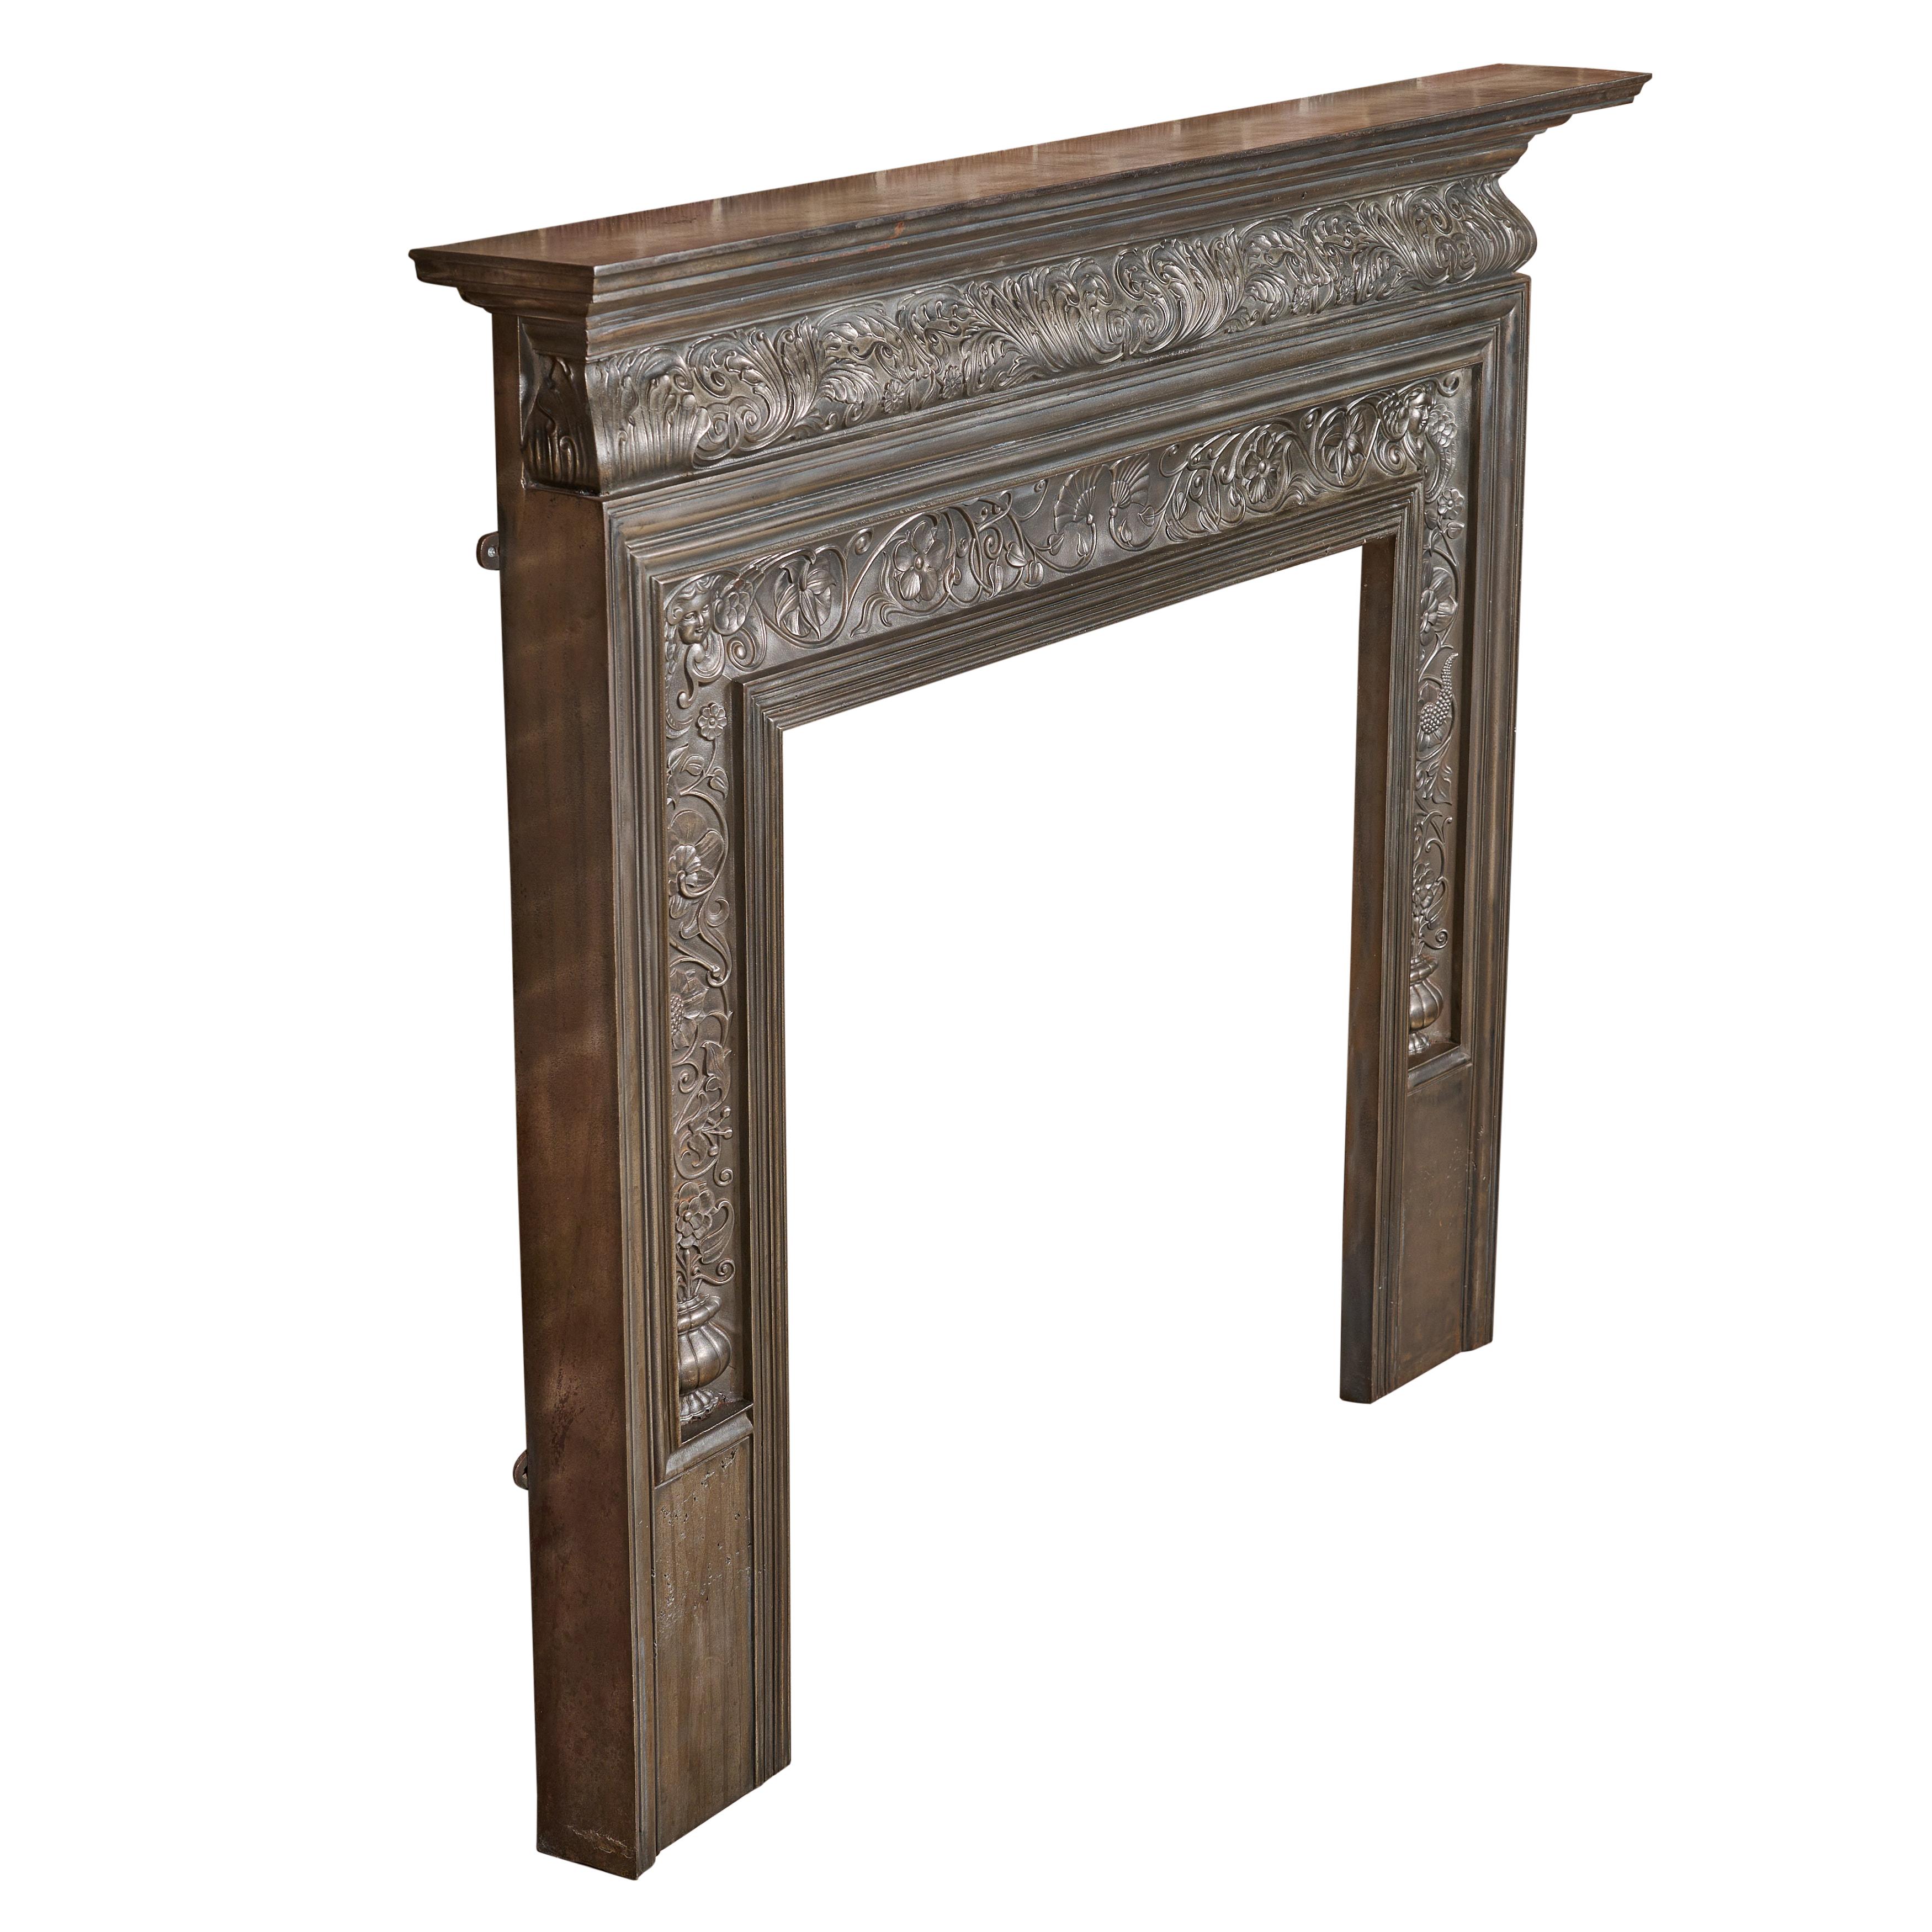 Late 19th Century English Polished Cast Iron Fireplace Surround by Coalbrookdale For Sale